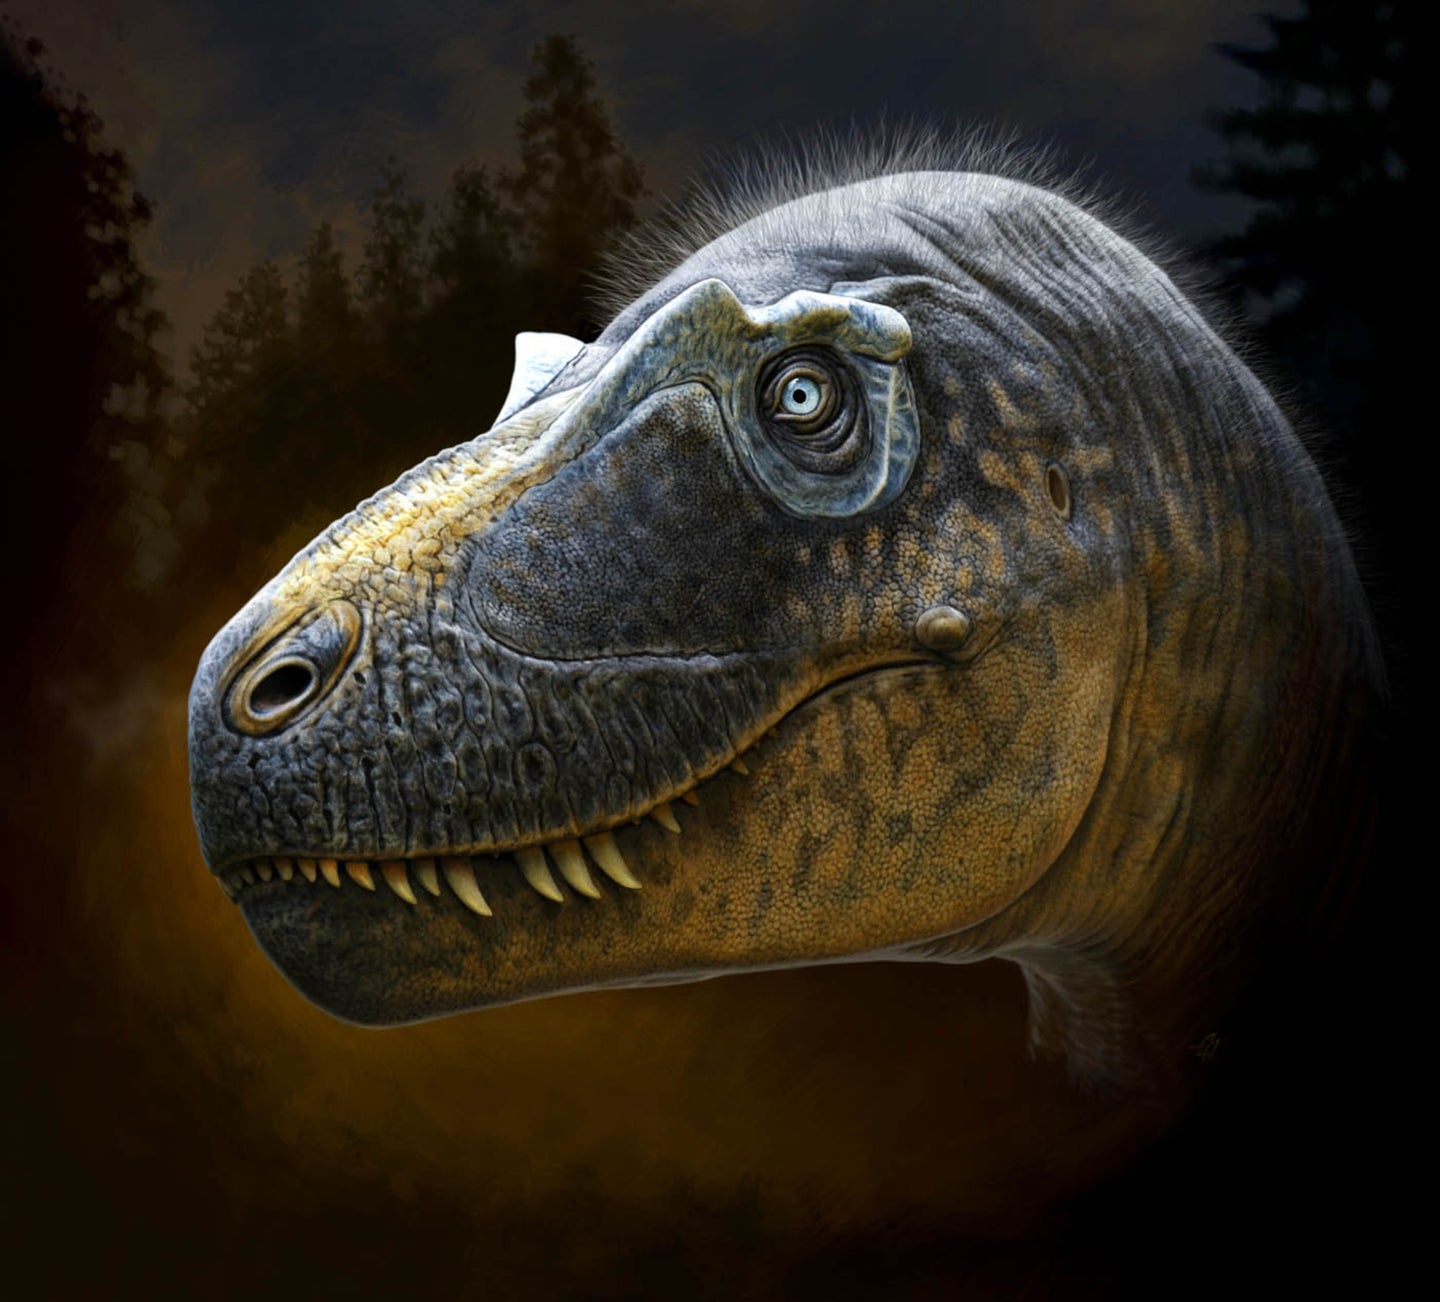 This new species of tyrannosaur is recognized by the unique arrangement of small hornlets around the eye.